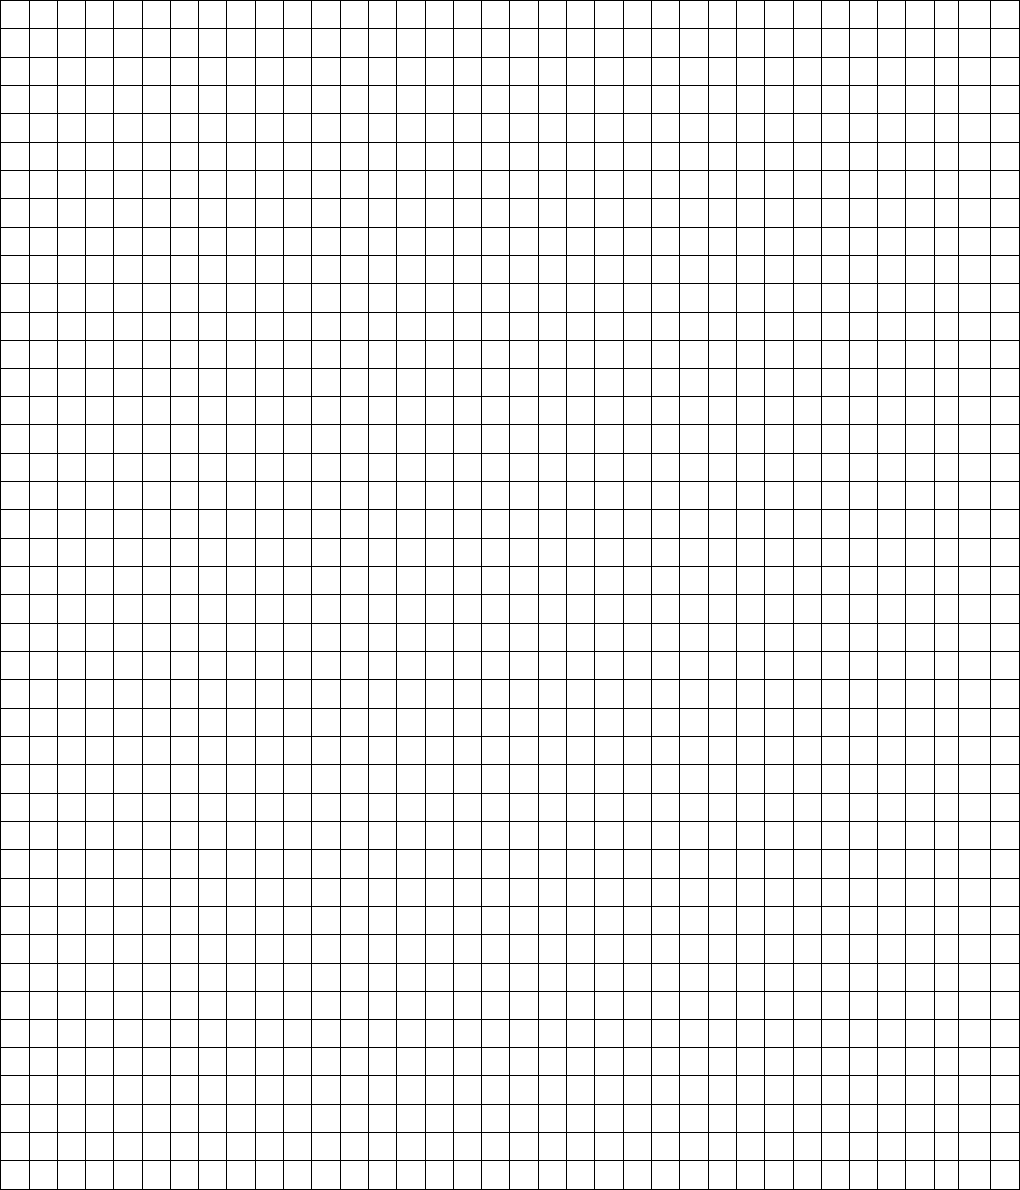 5-printable-centimeter-graph-paper-templates-how-to-wiki-05-cm-graph